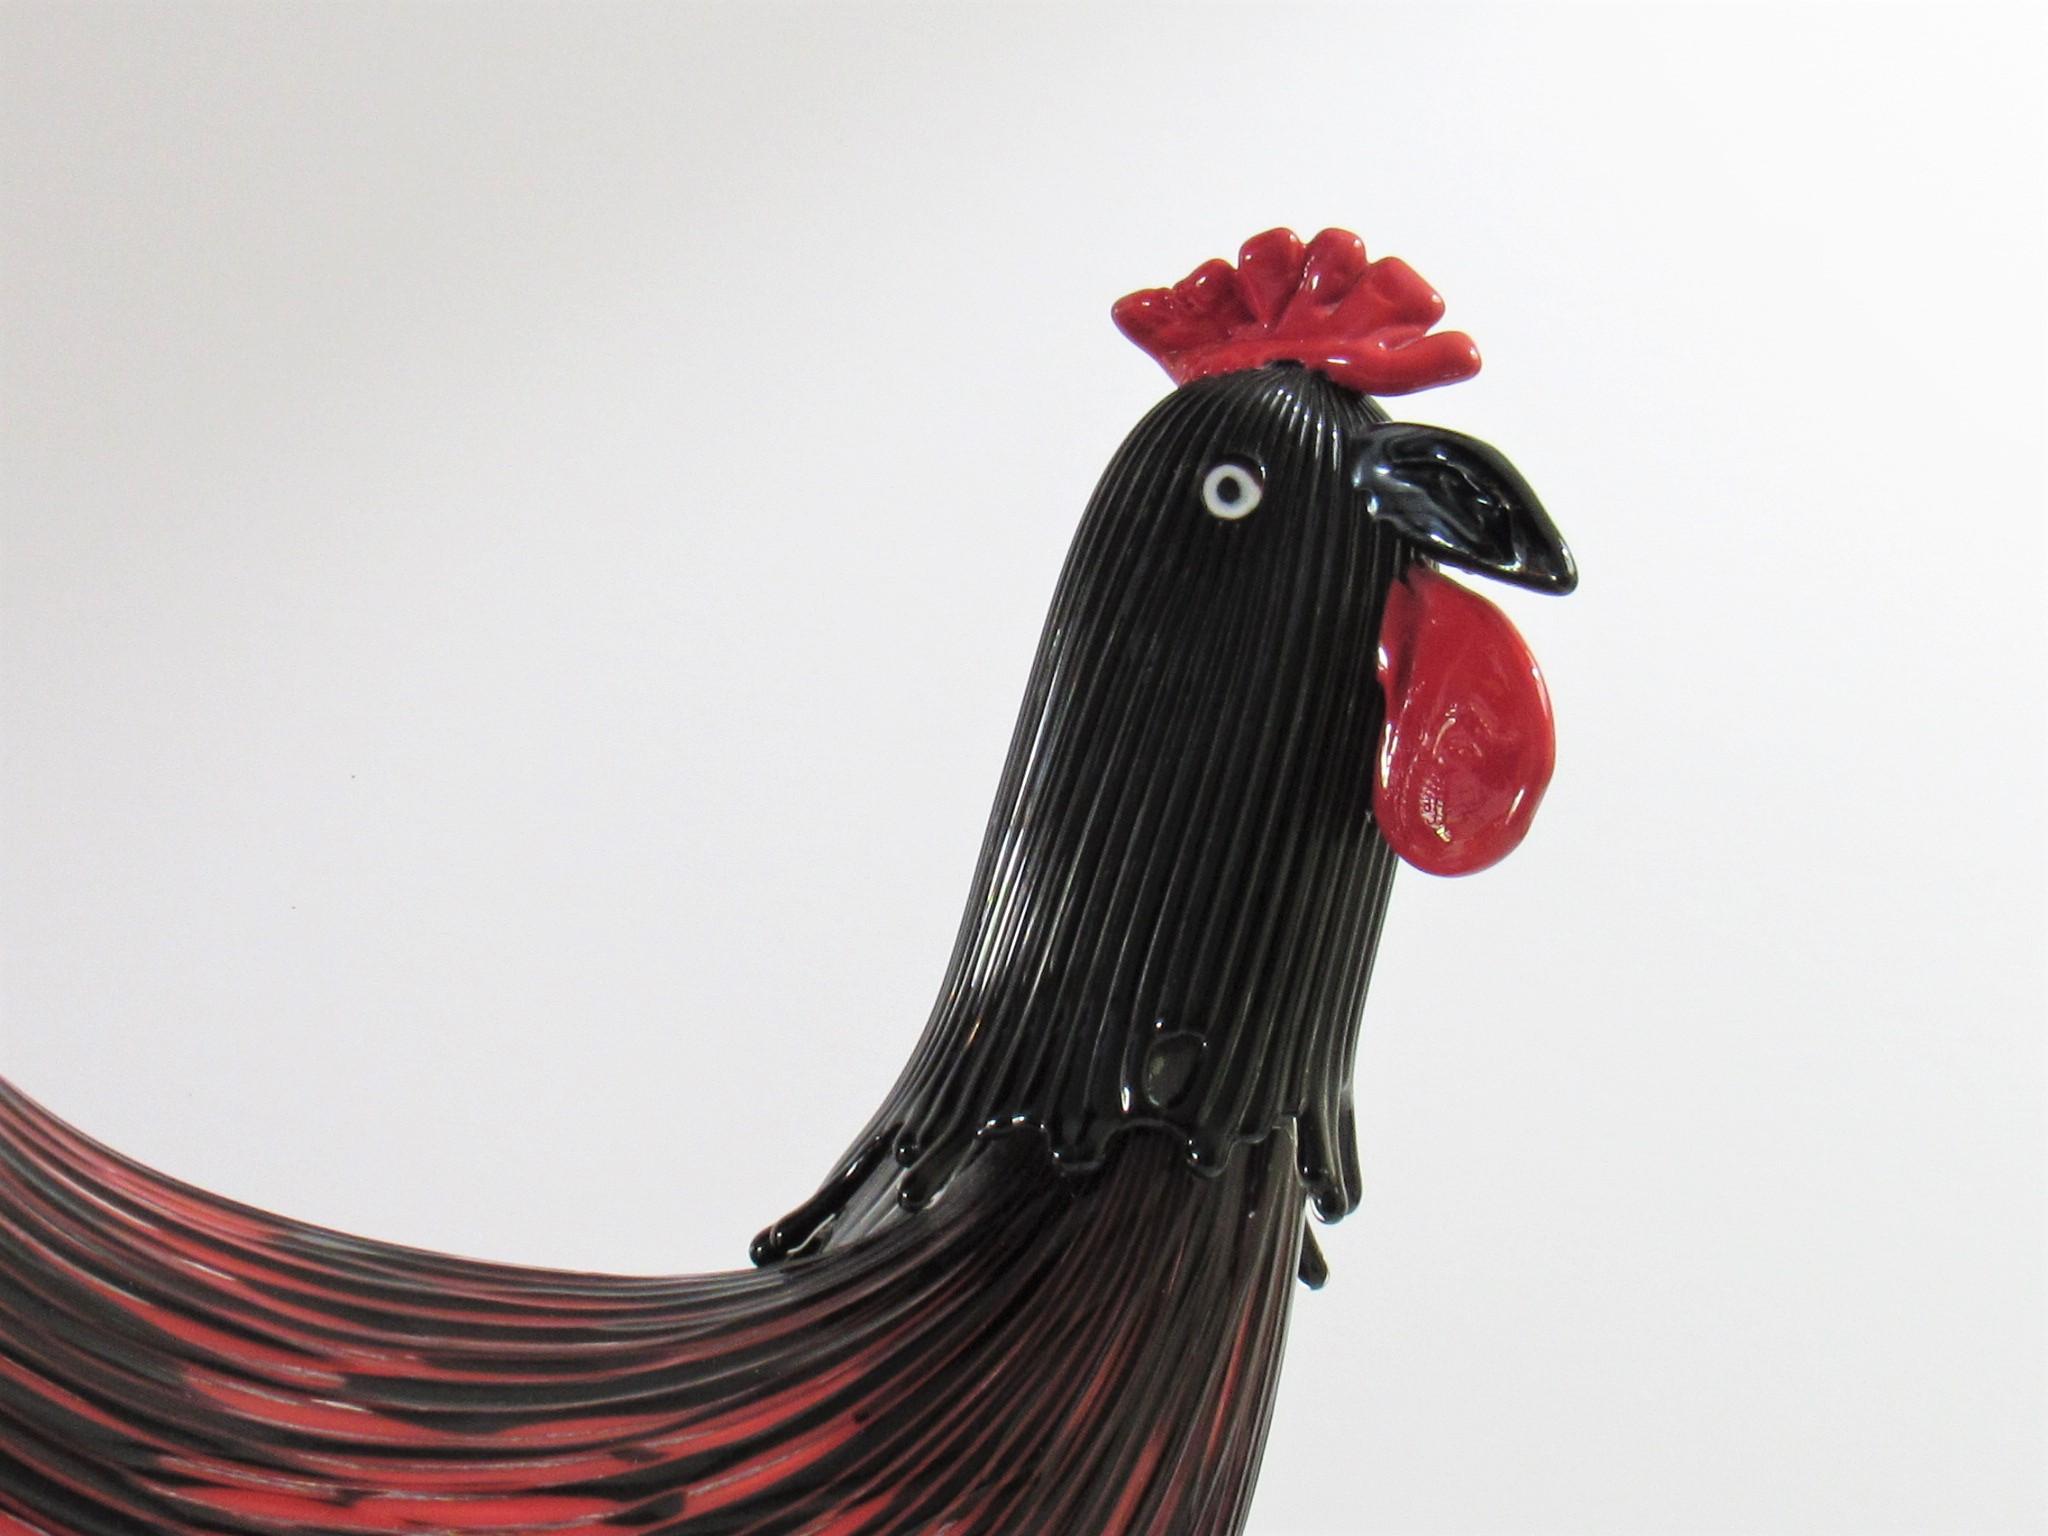 20th Century Toni Zuccheri for Venini Murano Glass Sculpture of a Rooster, Signed, 1979